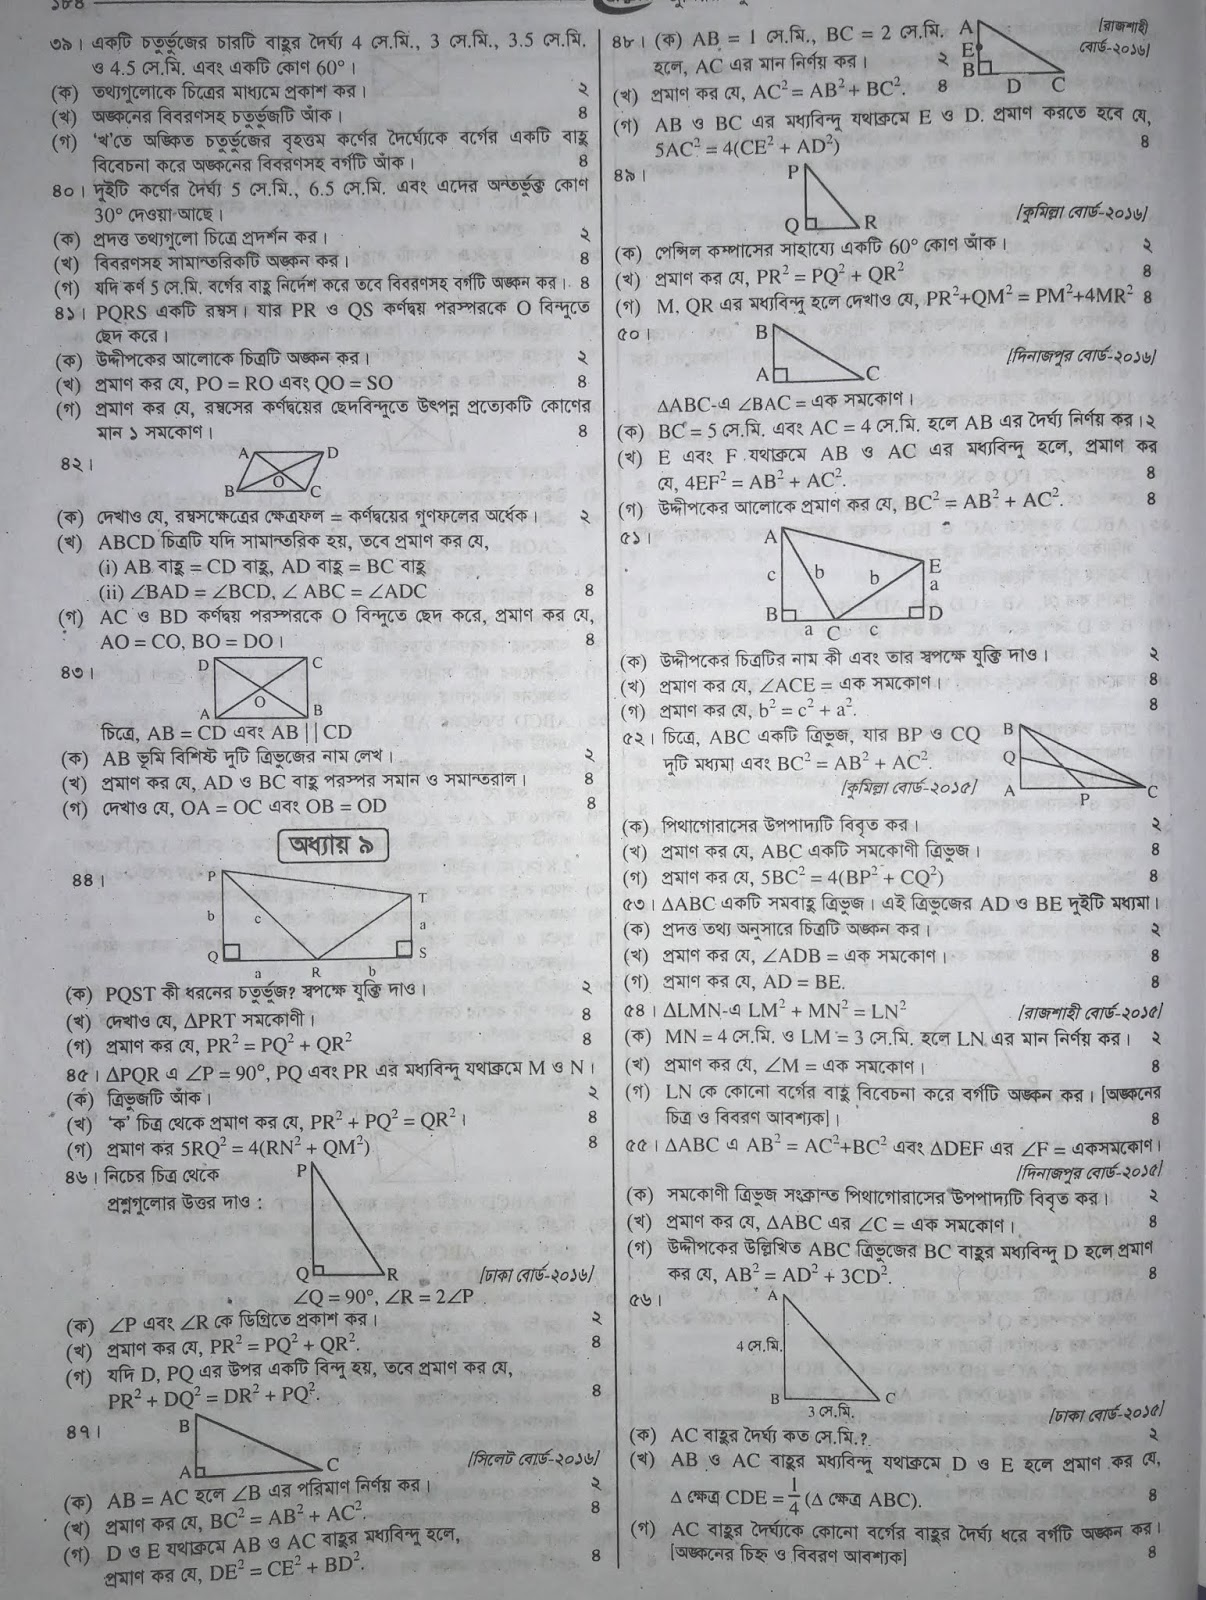 jsc Math suggestion, exam question paper, model question, mcq question, question pattern, preparation for dhaka board, all boards